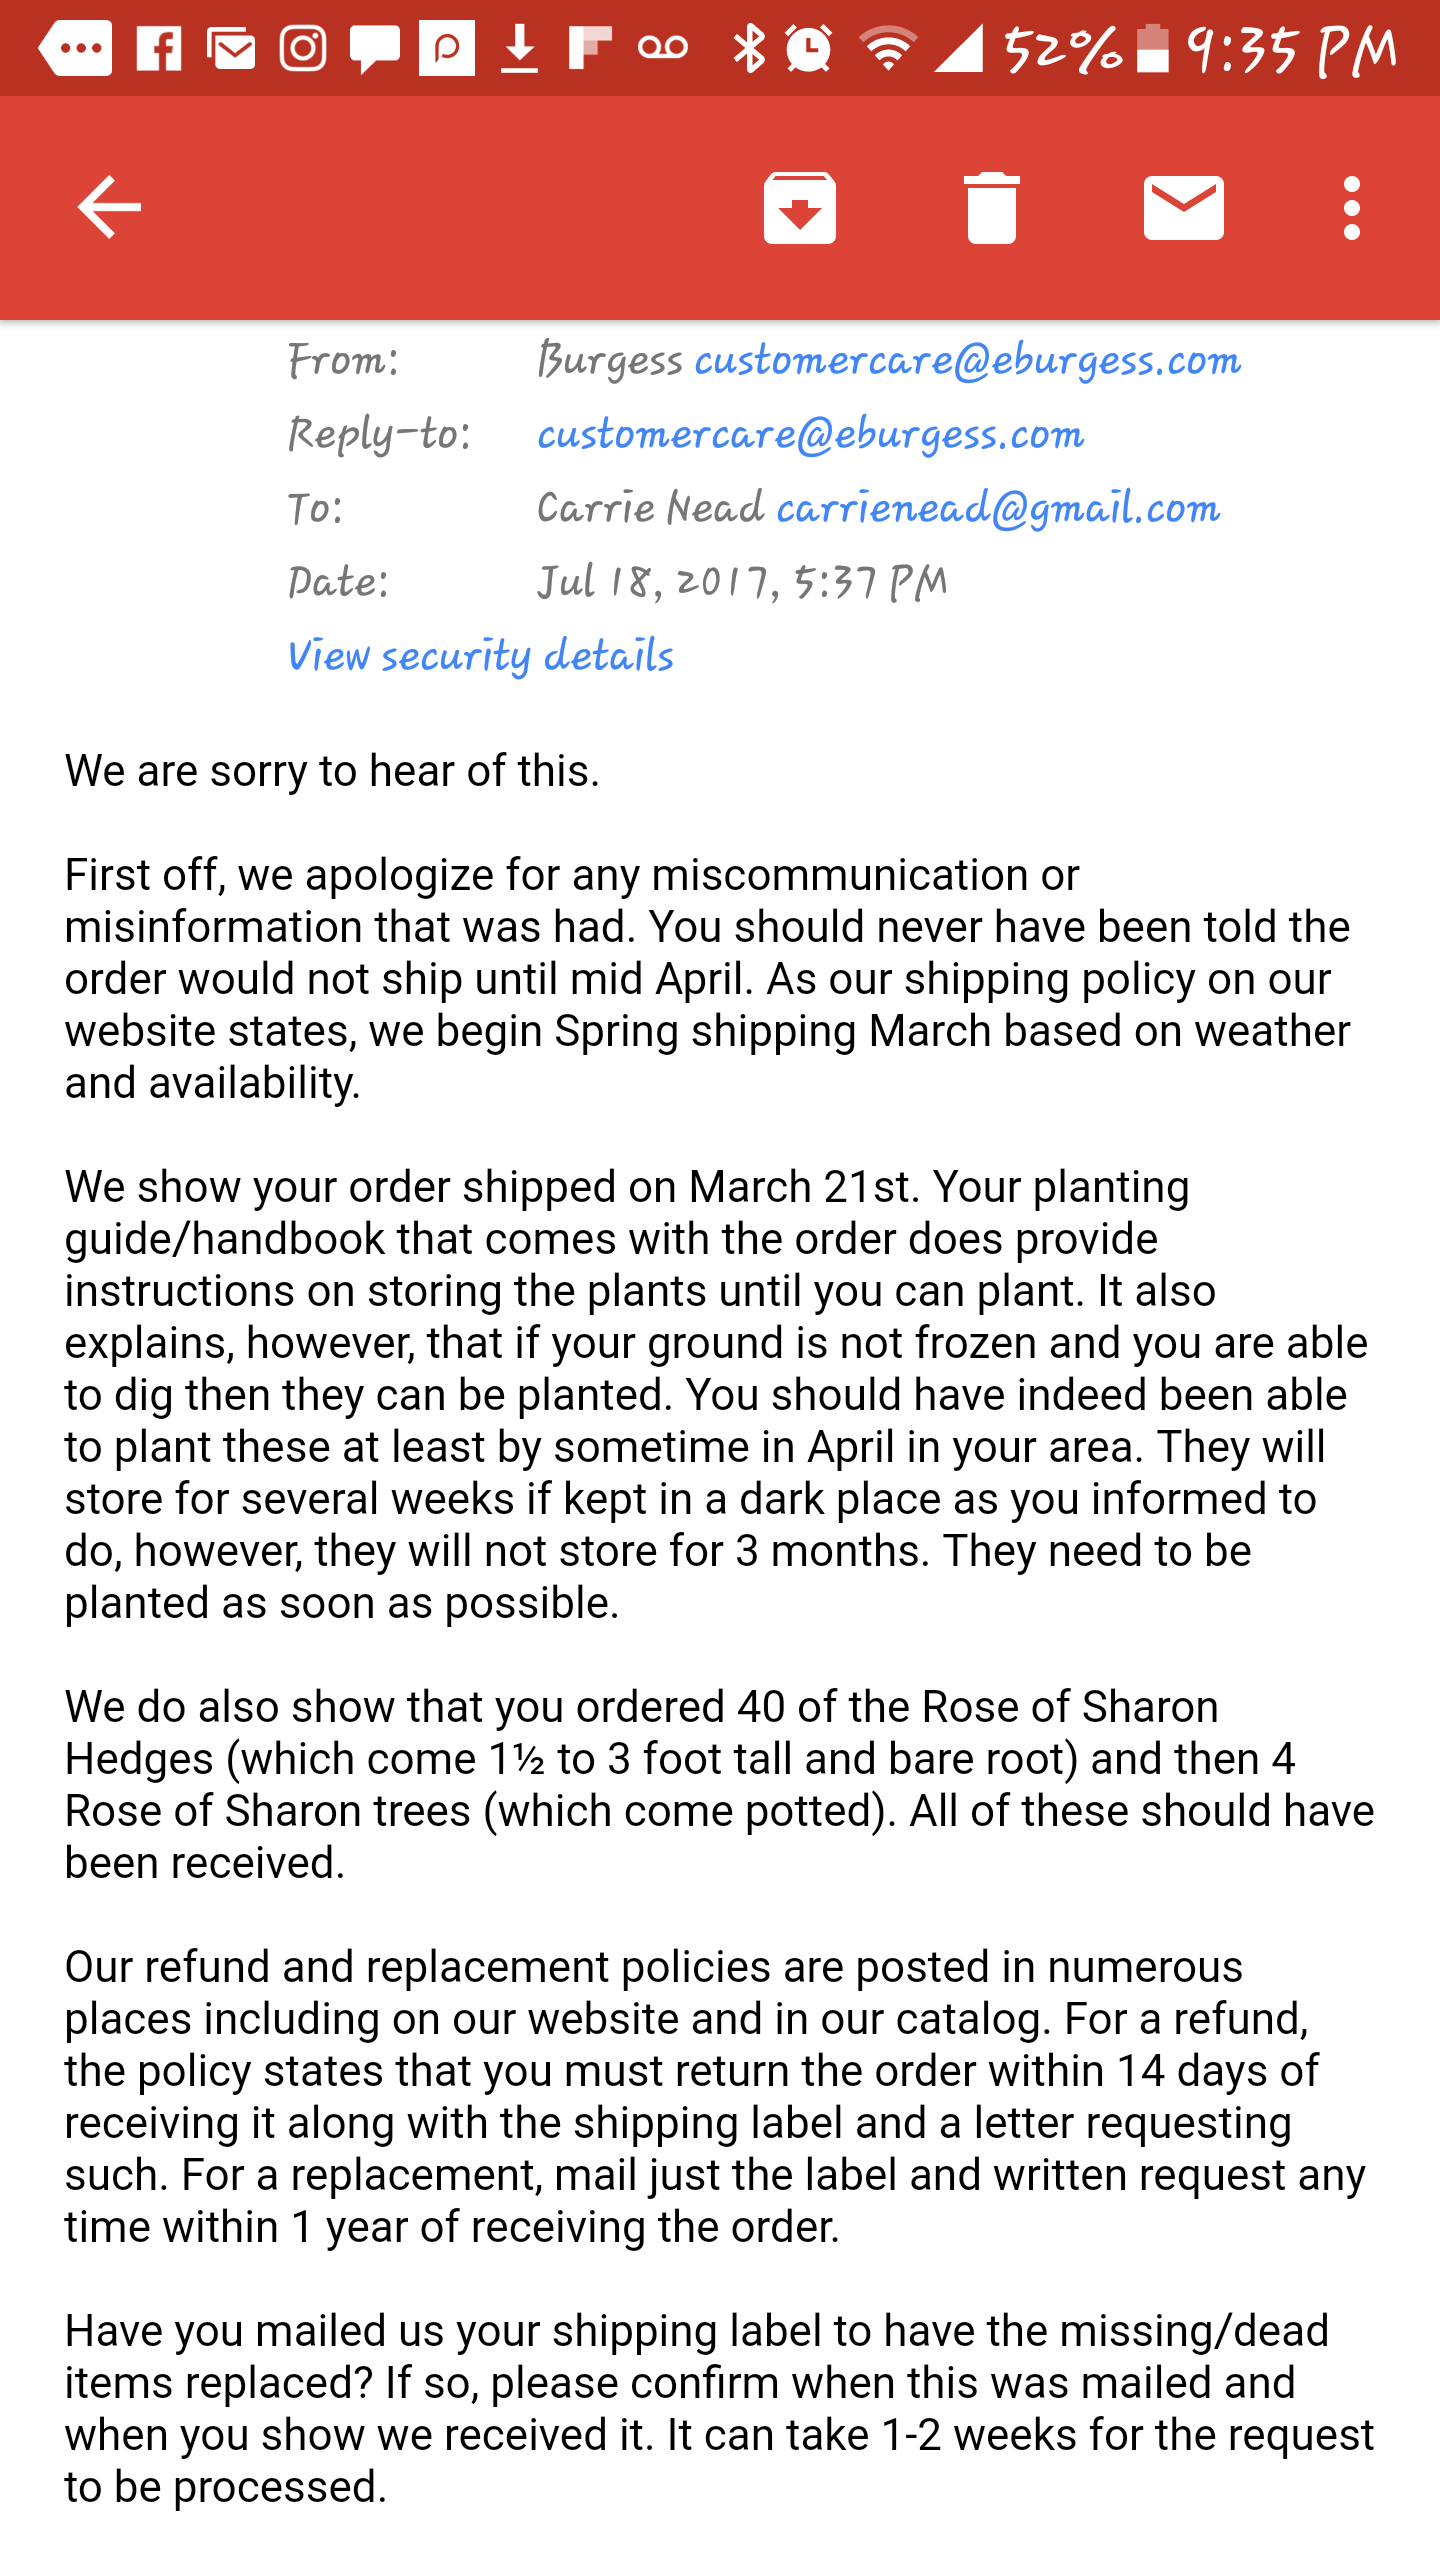 Email Response from Burgess asking again if i sent back yhr shipping label.